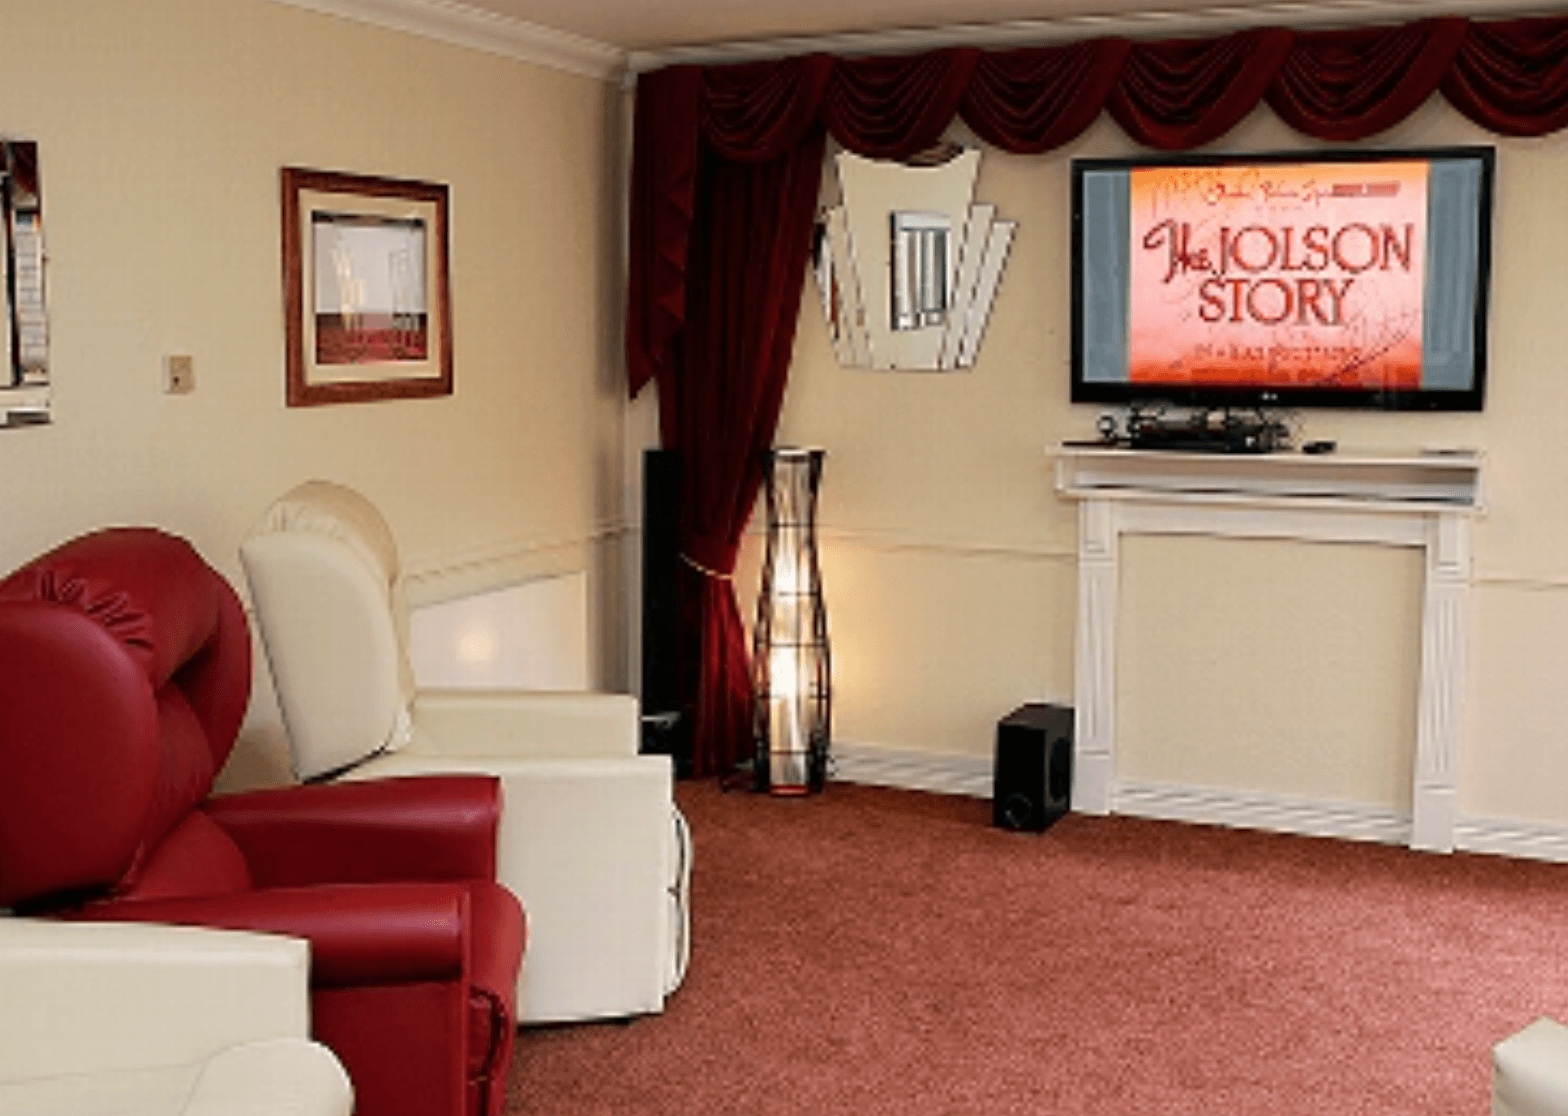 Cinema Room of Deanfield Care Home in Glasgow, Scotland